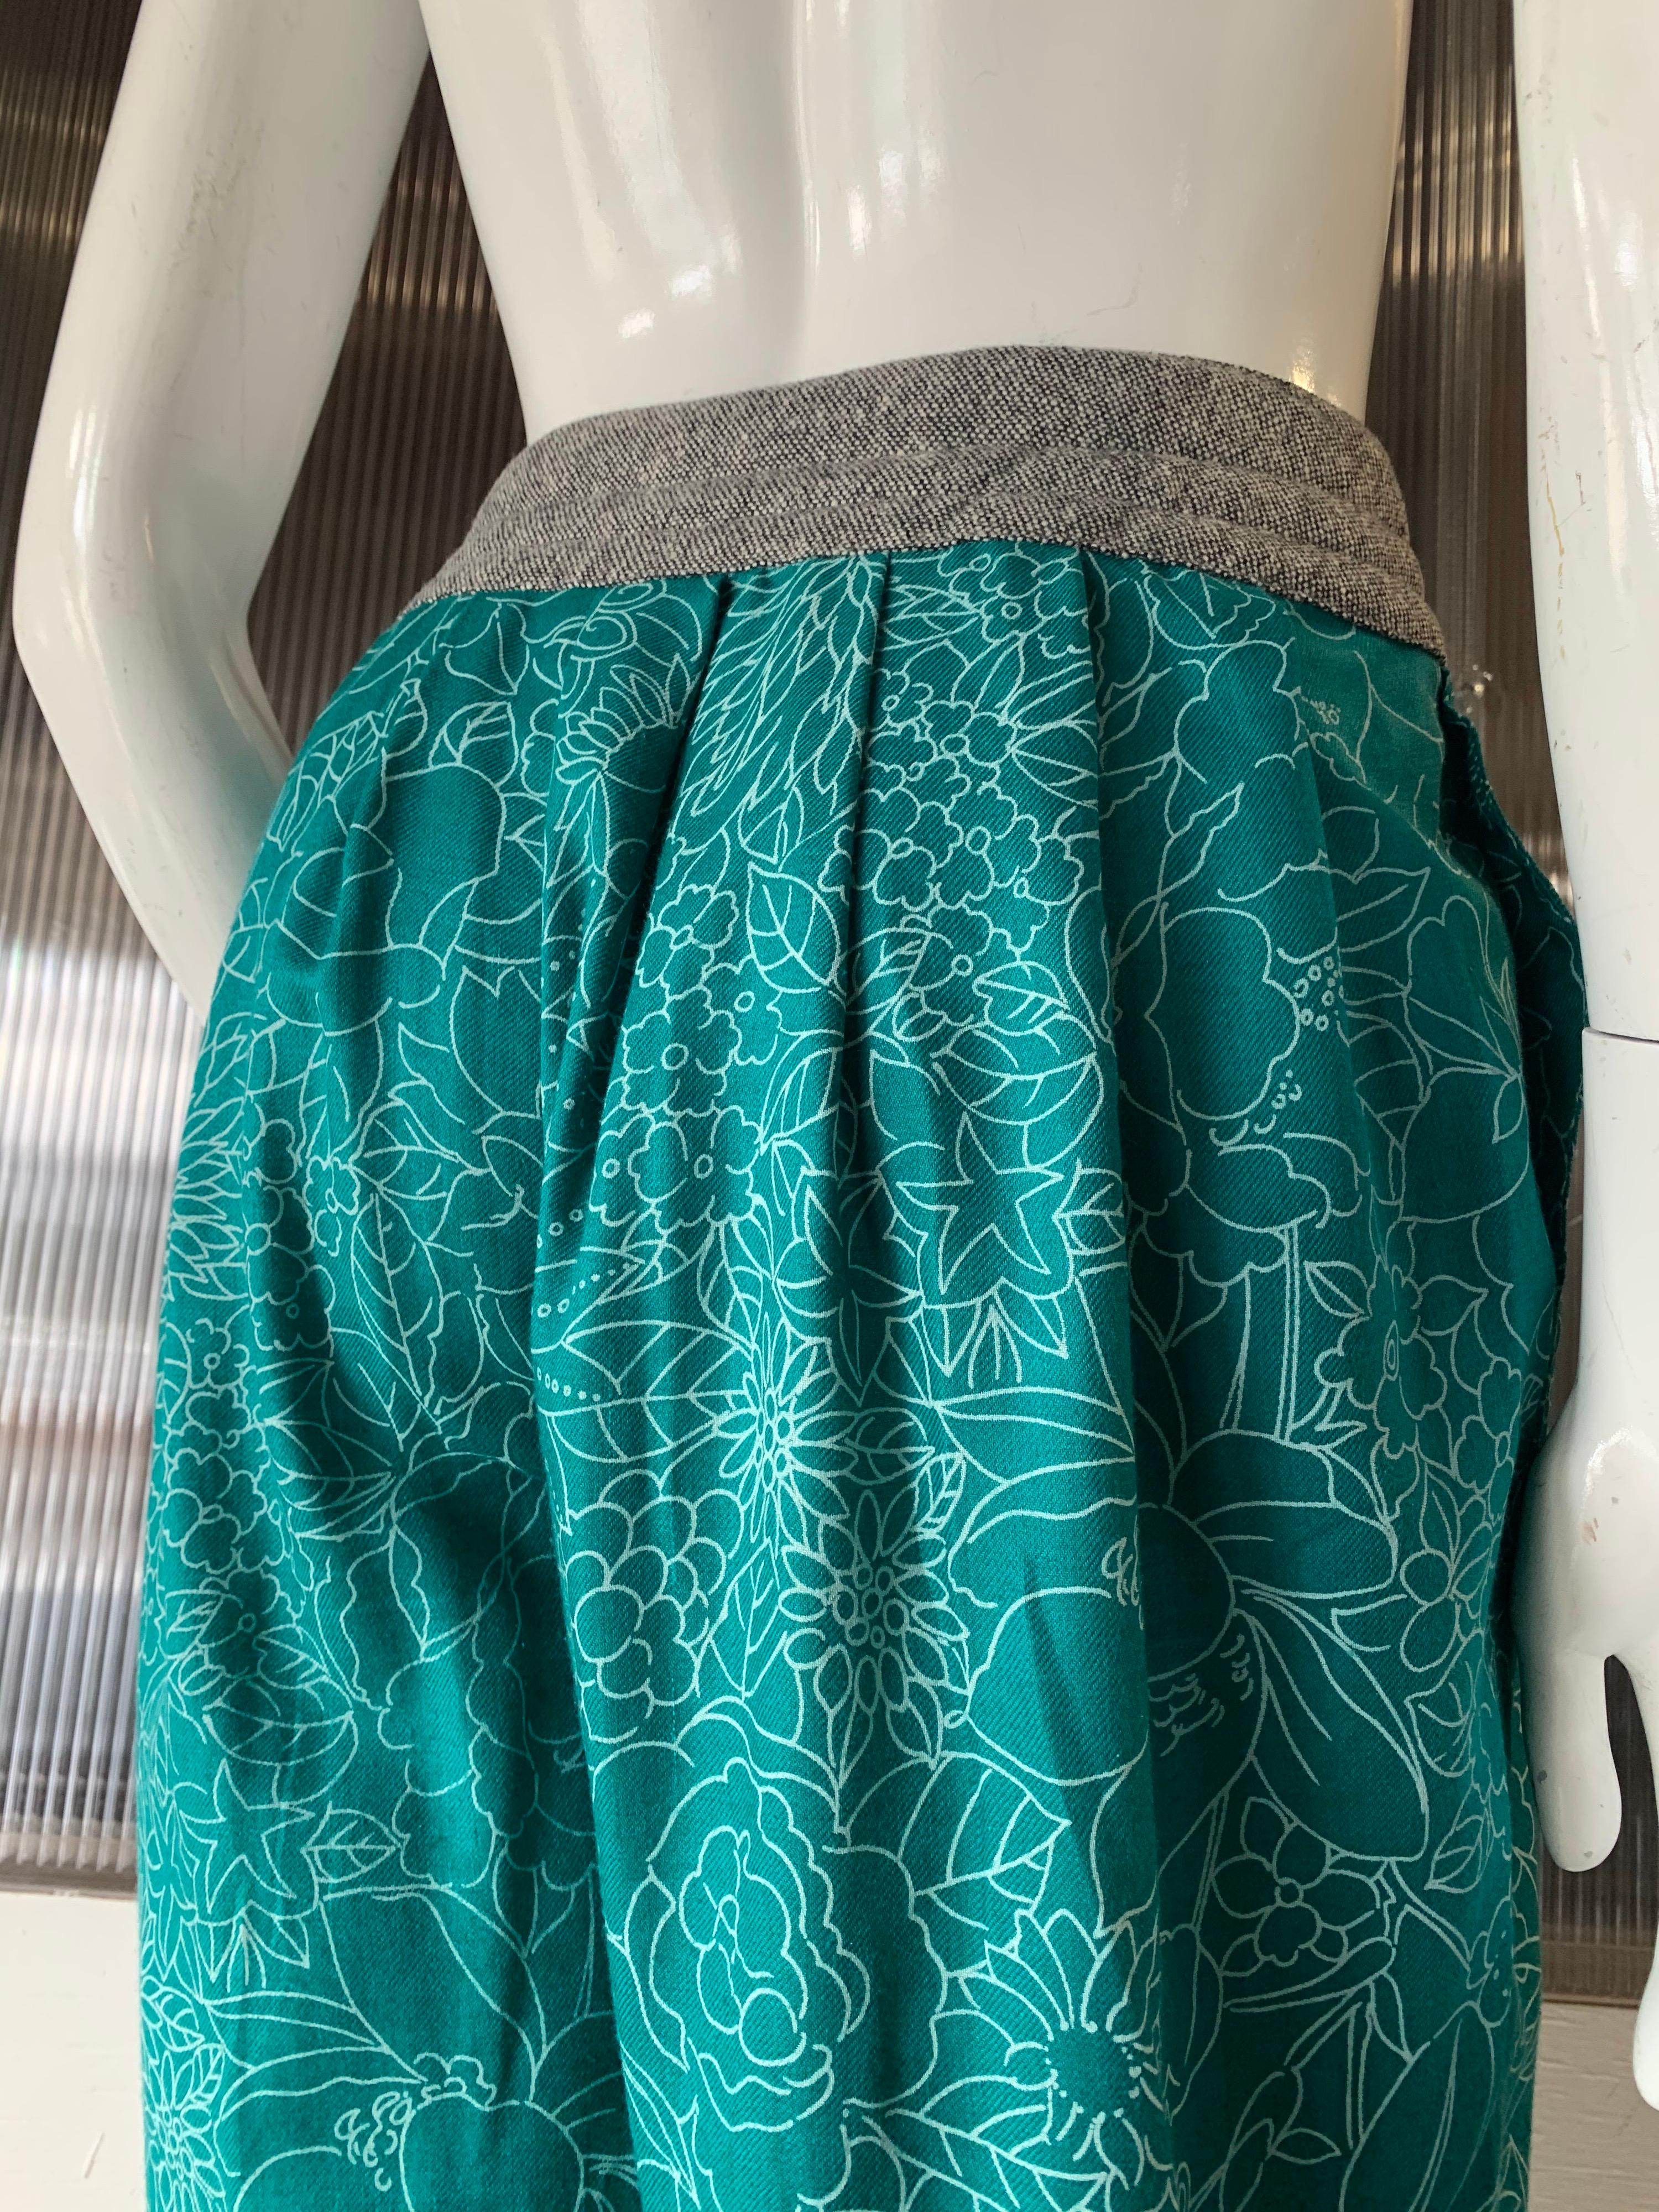 1980s Gianni Versace Harem Pants in Teal & White Floral Print & Trapunto Waist 2